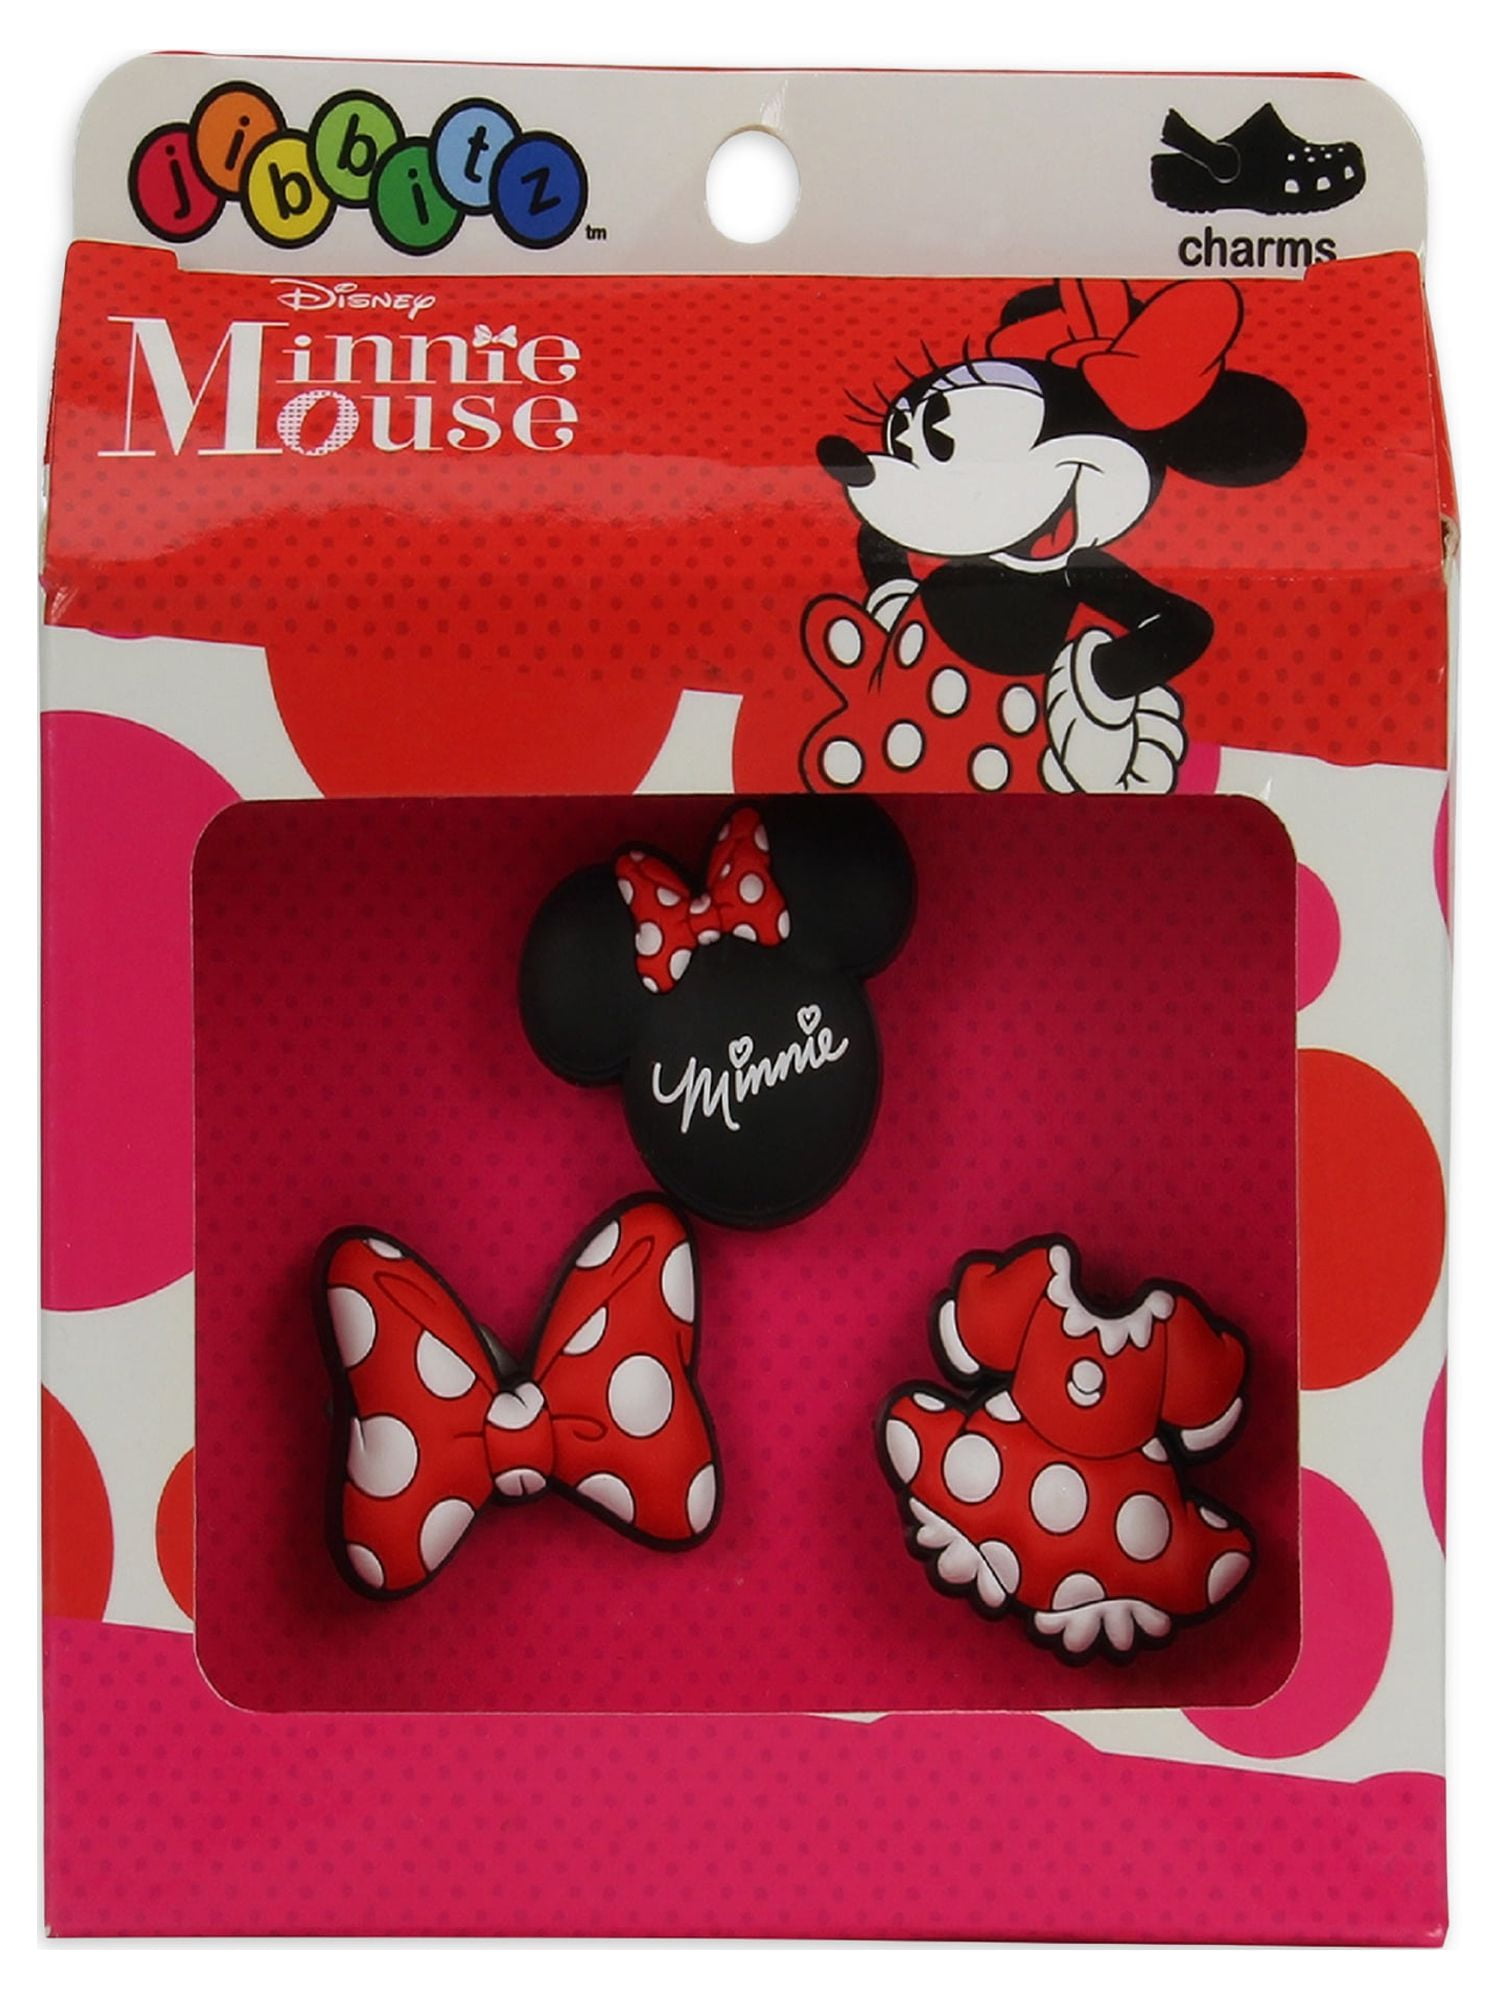 .com Crocs Jibbitz Shoe Charms Disney Charms Multi Pack - Mickey Mouse,  Minnie Mouse, Shoe Charms Characters $12.99